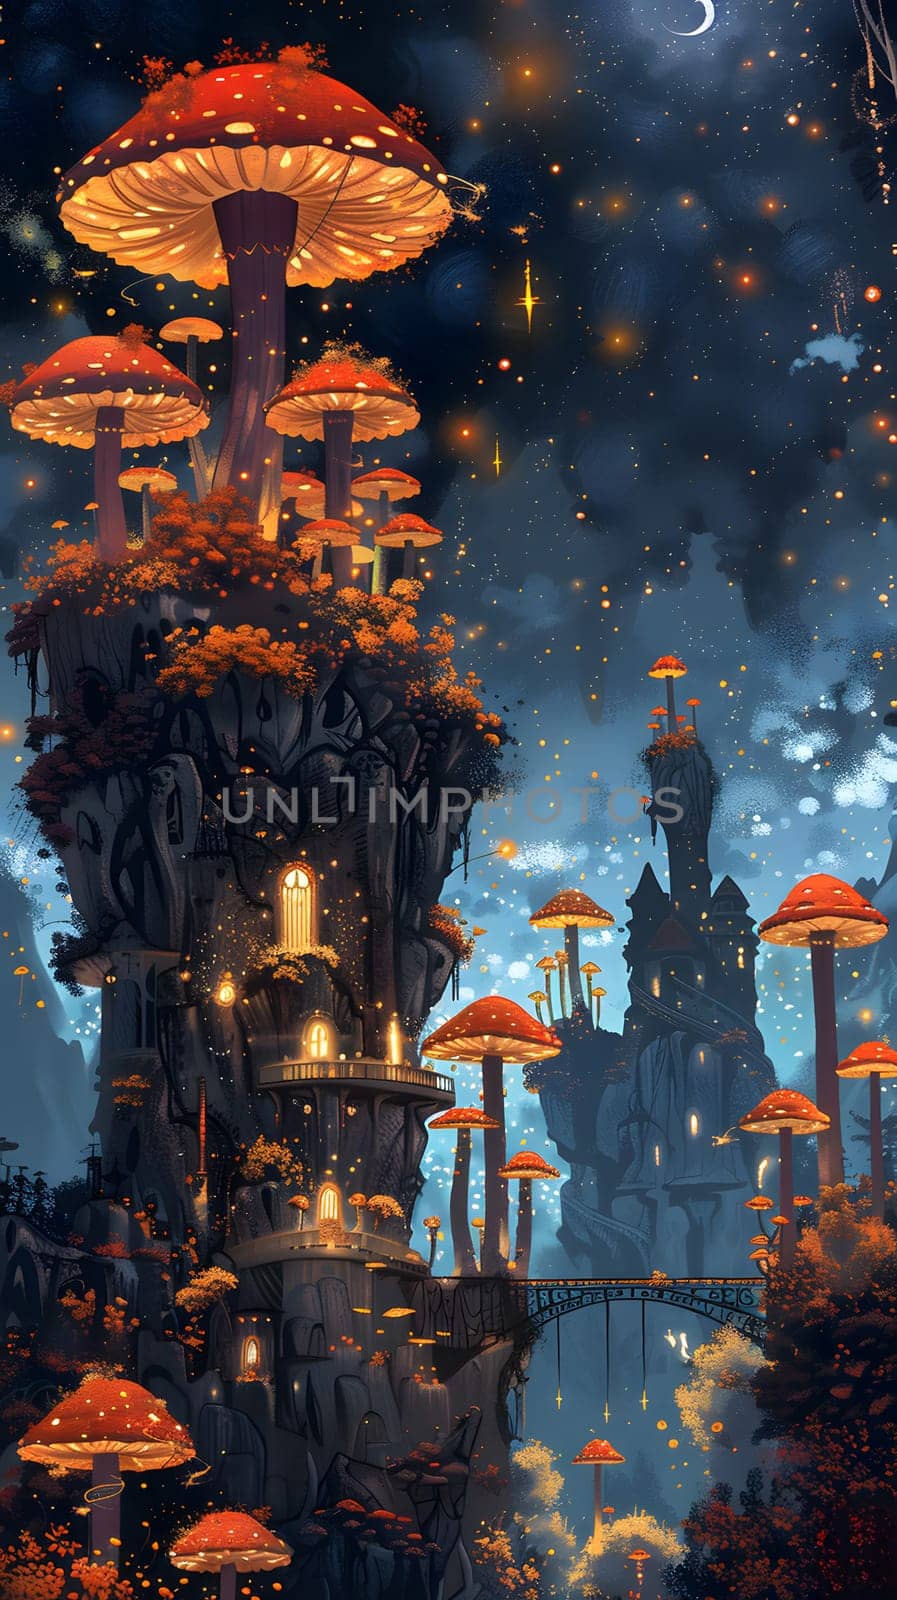 An art piece depicting a castle in a metropolis surrounded by mushrooms at dusk by Nadtochiy